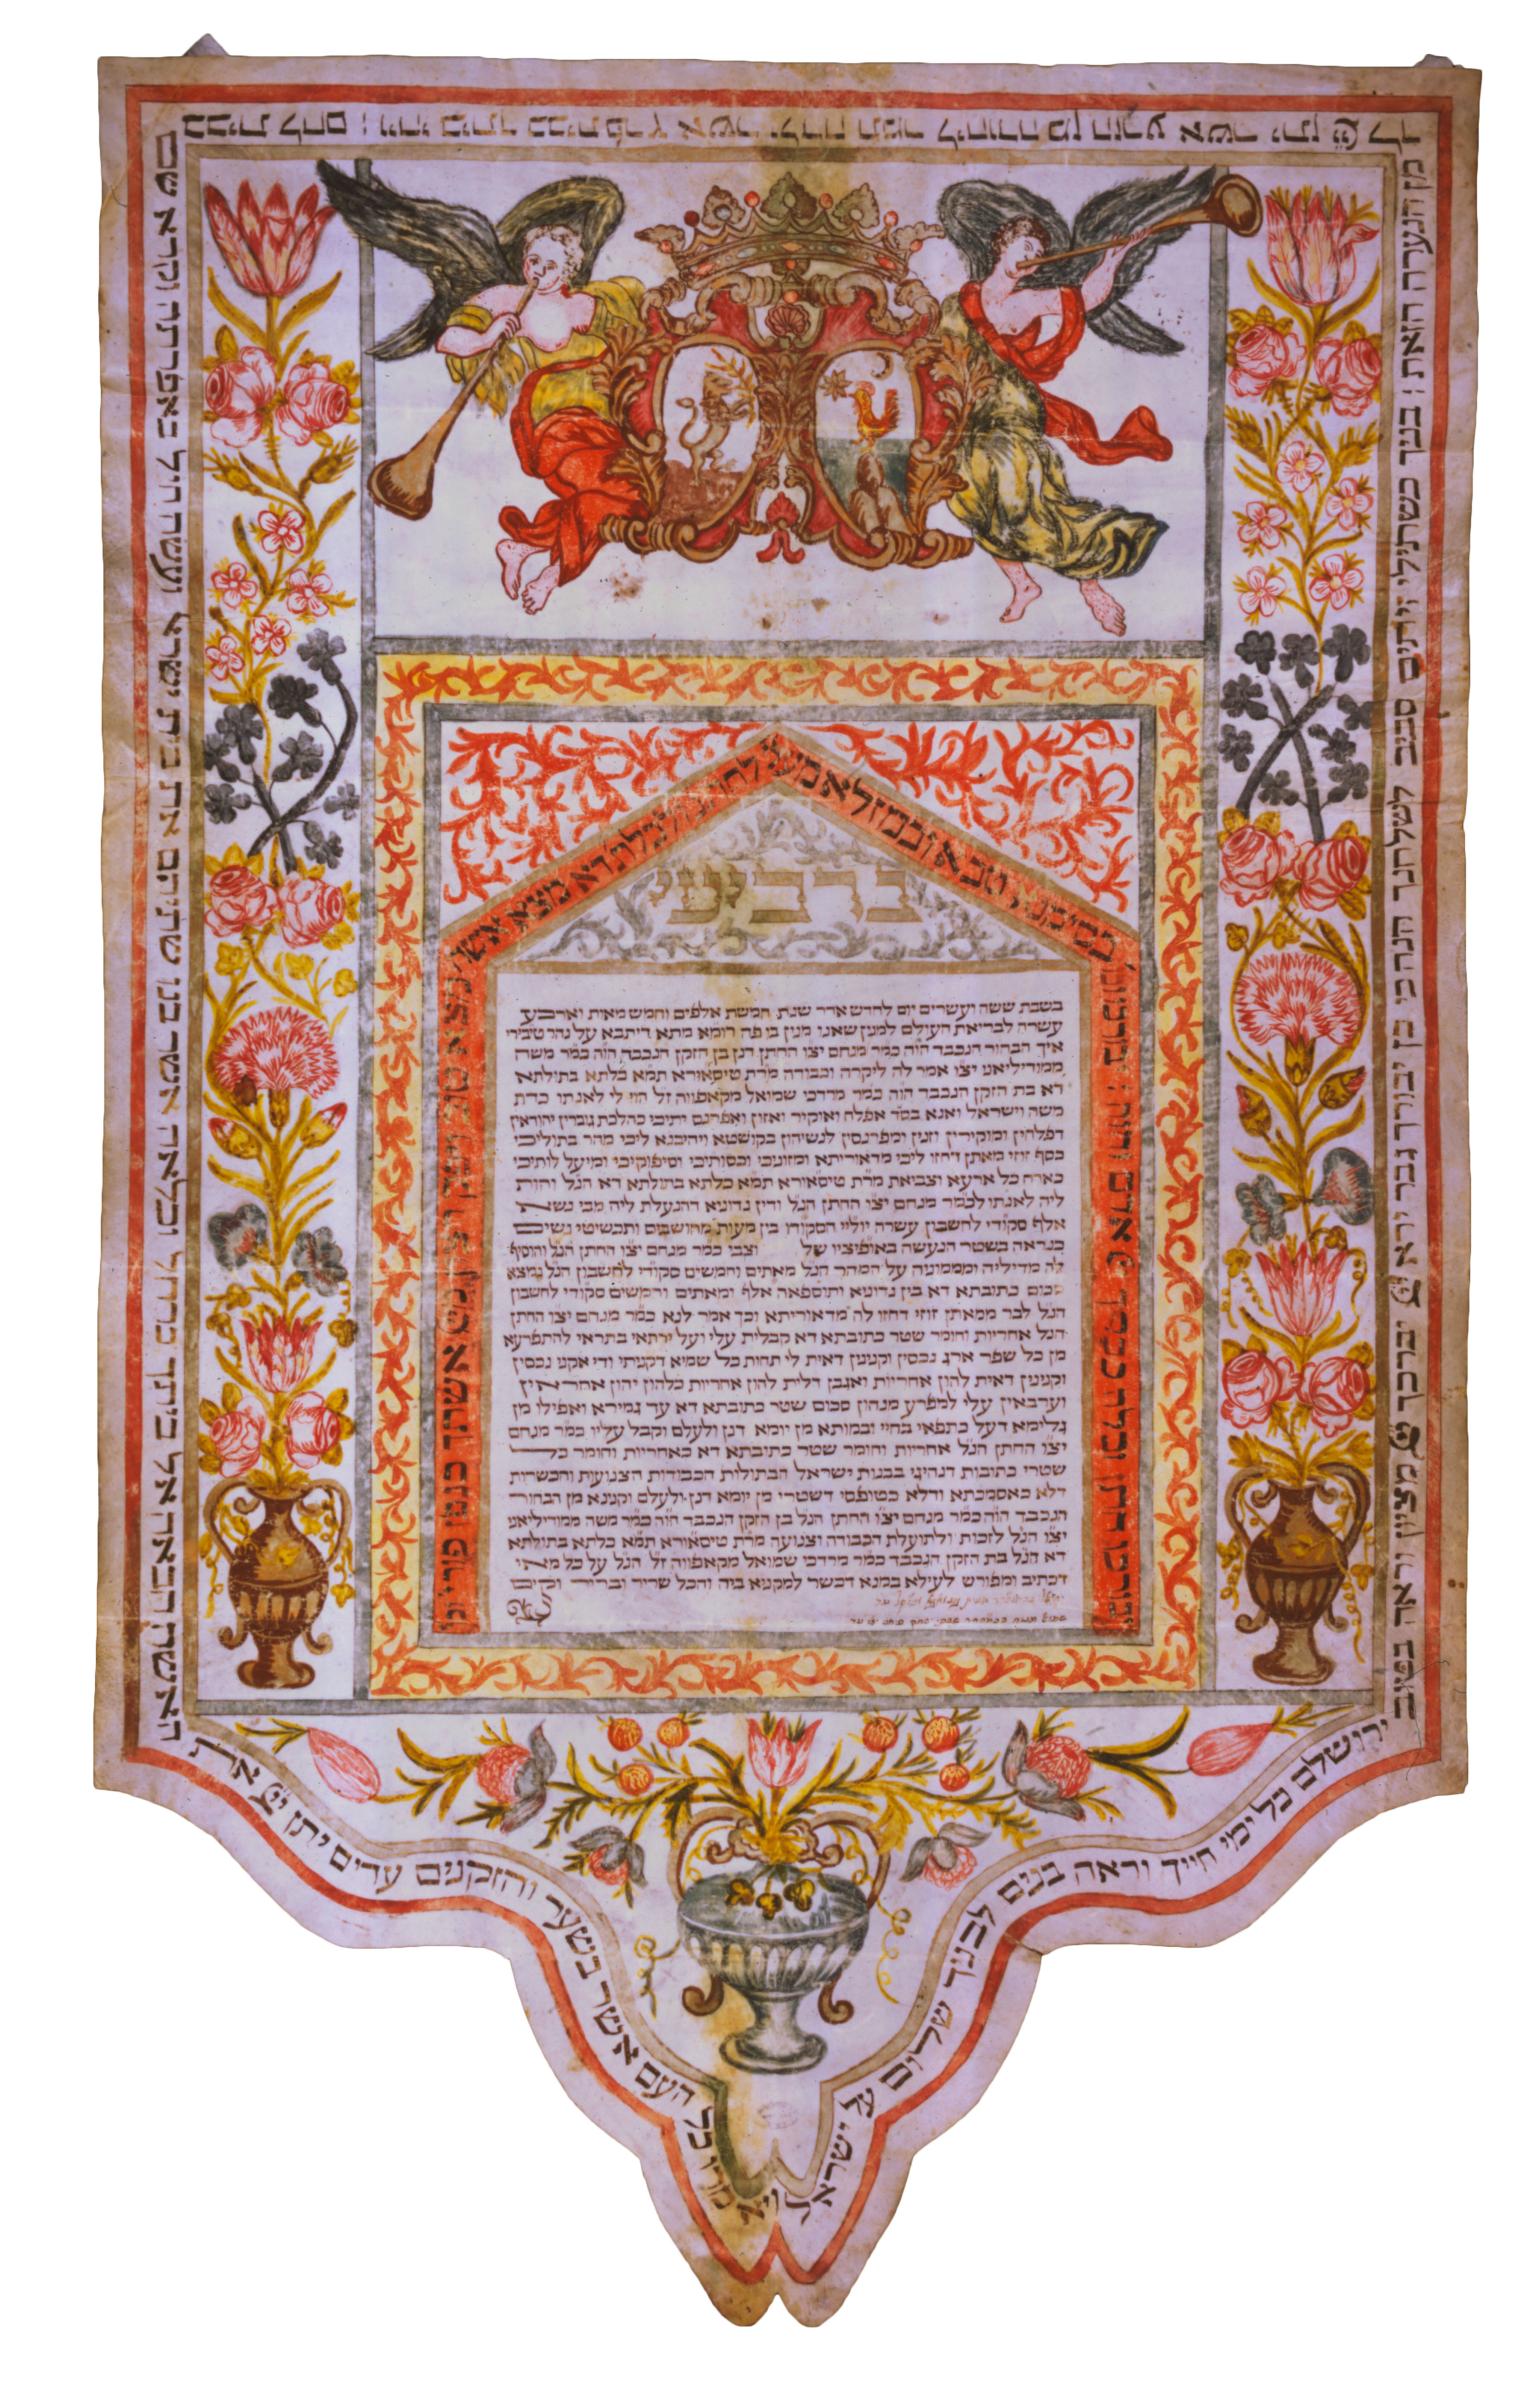 Aramaic text in center and around edge, with angels blowing trumpets at top, and floral decoration on either side.